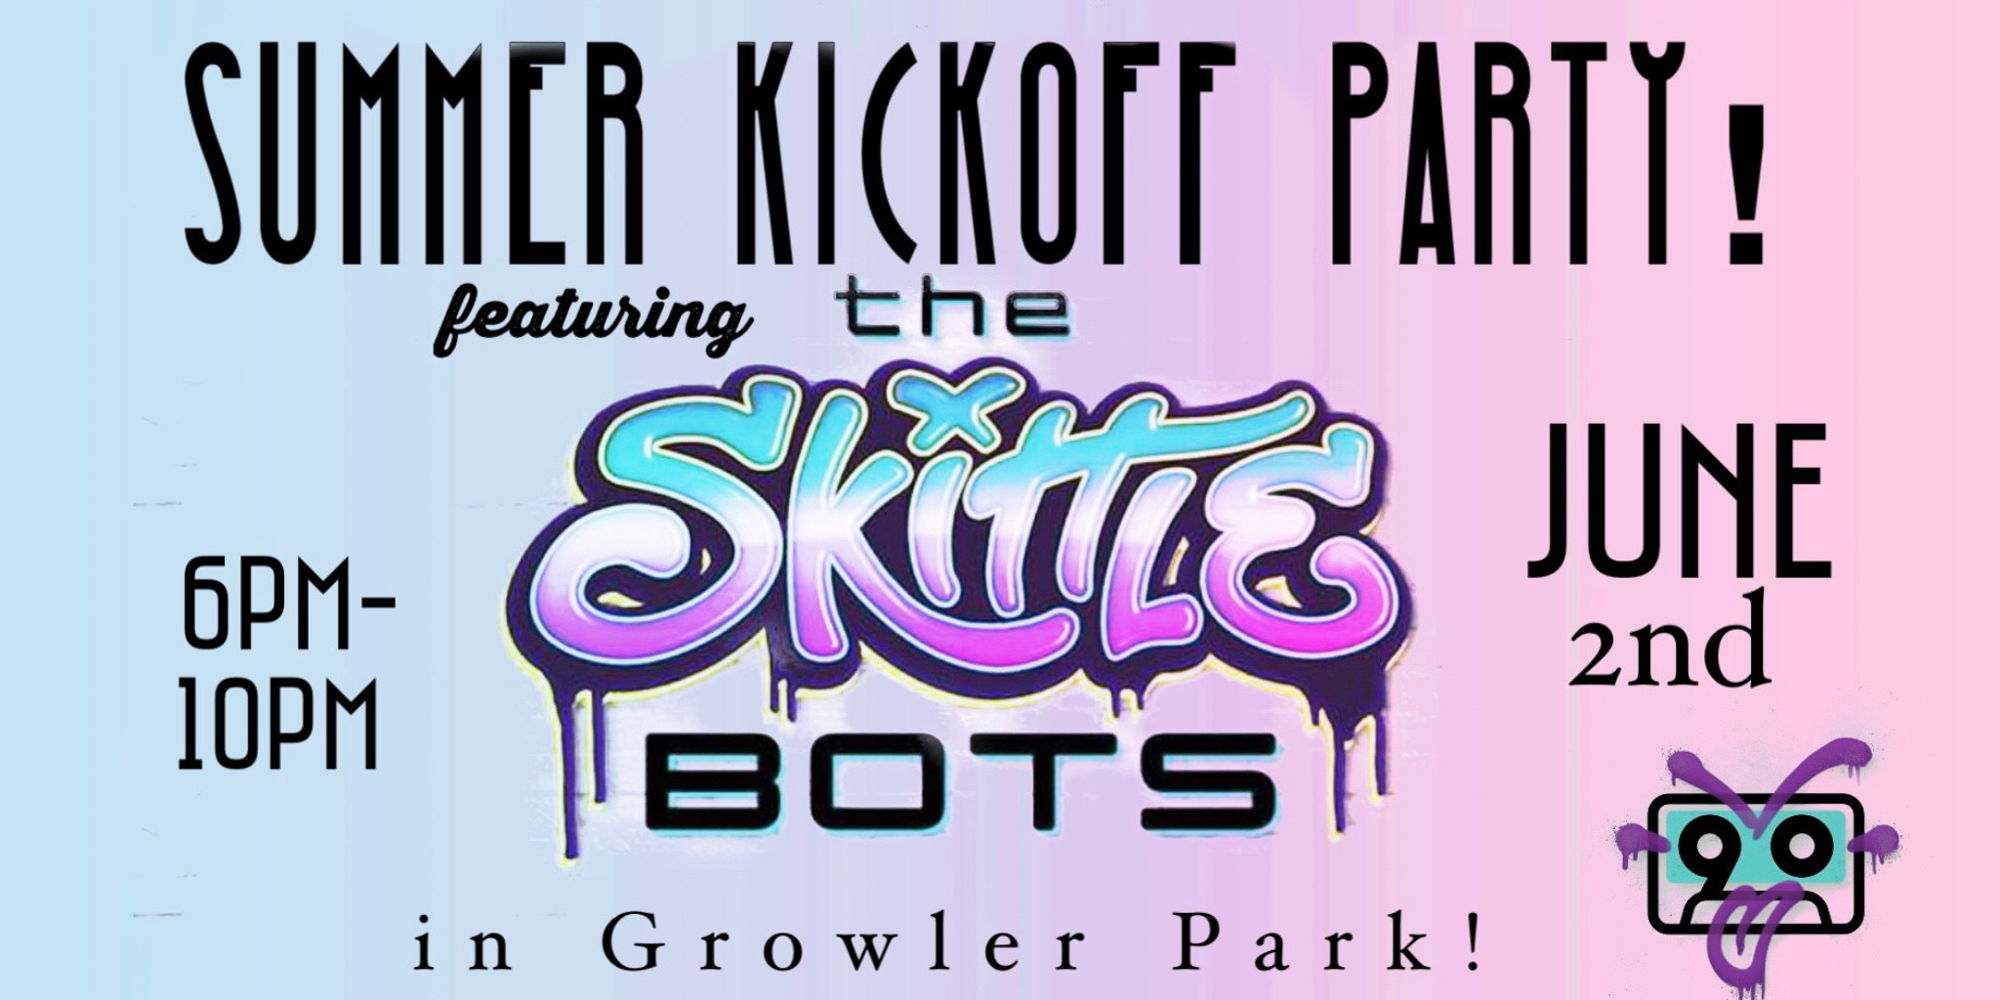 Summer Kickoff Party! promotional image